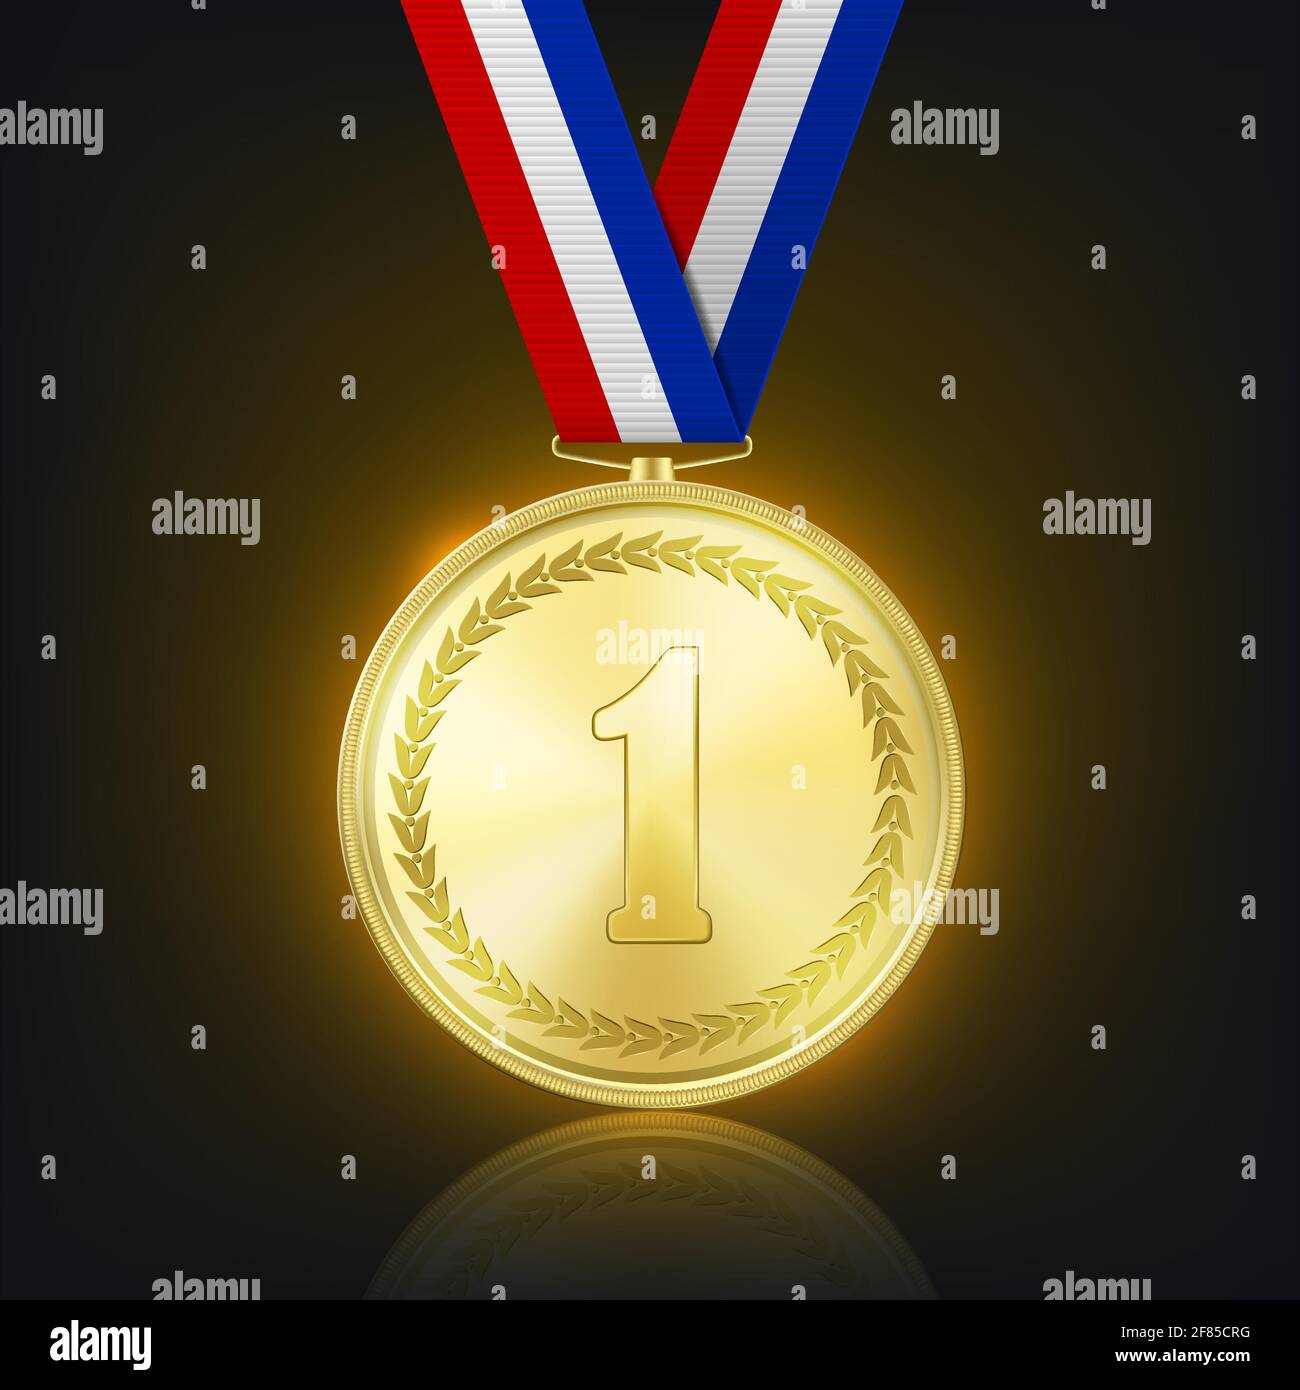 Vector 3d Realistic Shiny Golden Win Medal with Striped Ribbon on Dark Background with Reflection. Victory Concept. Glow First Place Badge Closeup on Stock Vector